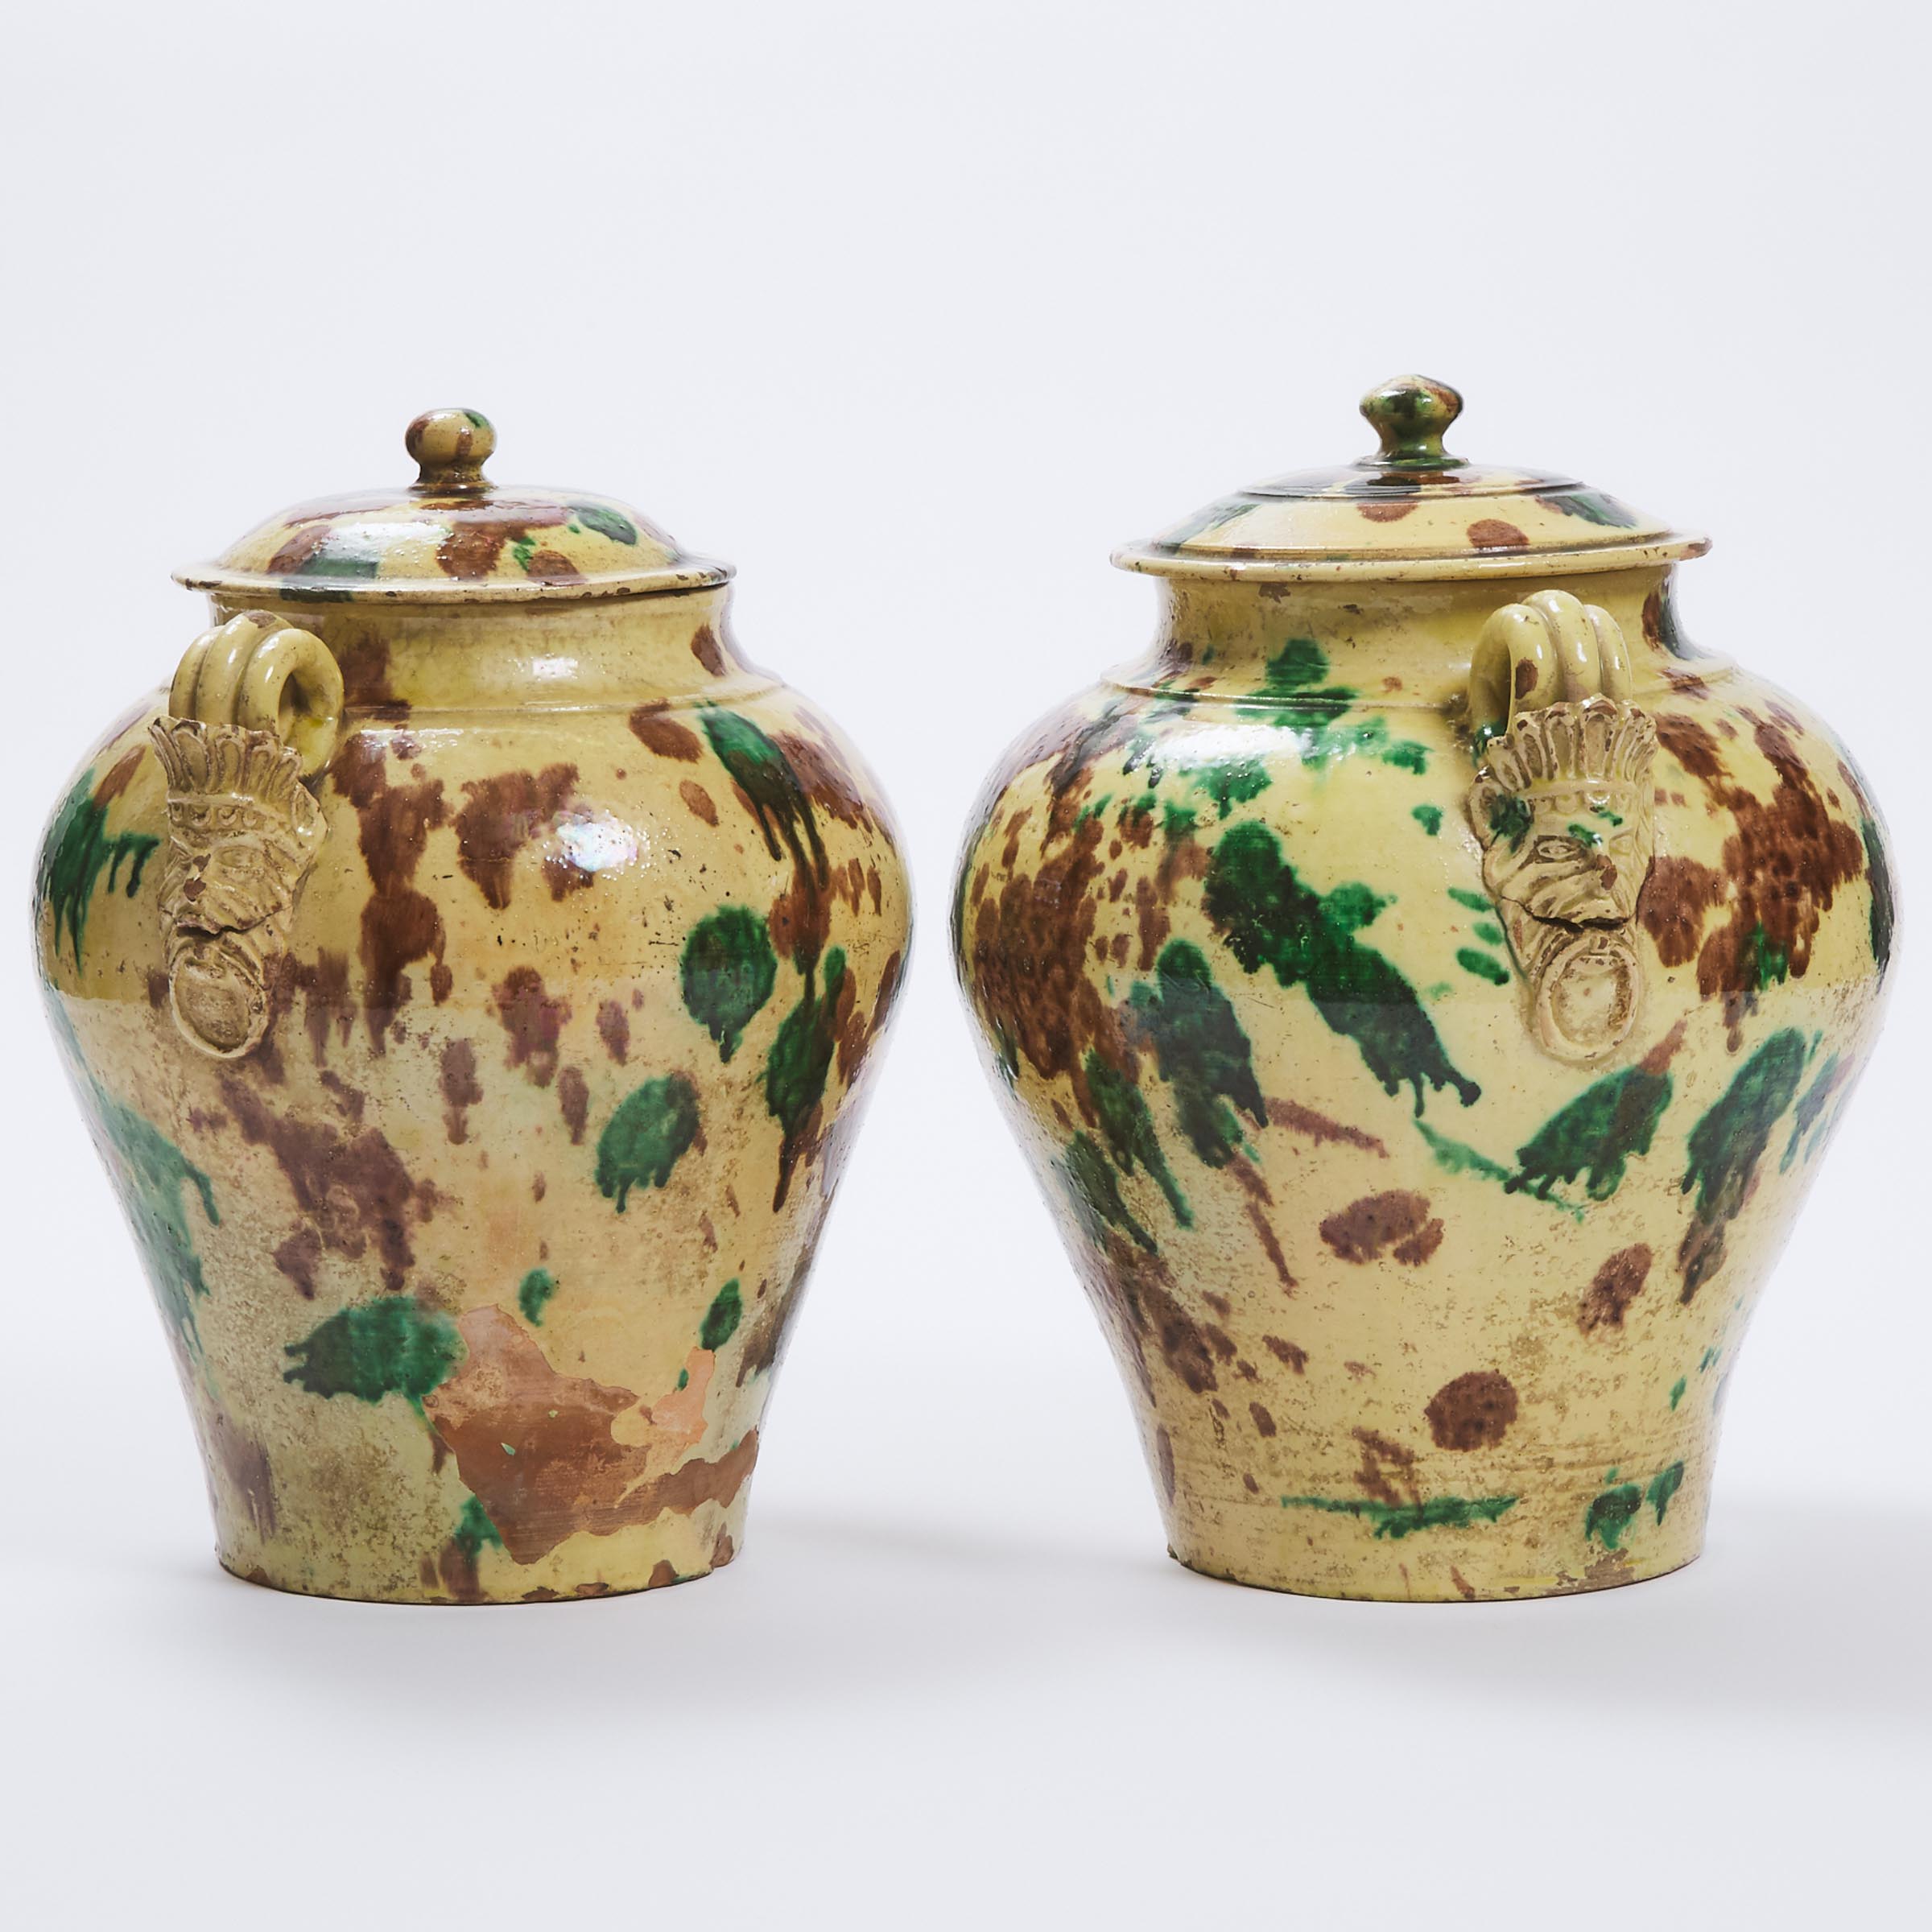 Pair of Italian Green and Brown Spatter Glazed Earthenware Two-Handled Covered Vases, 19th century